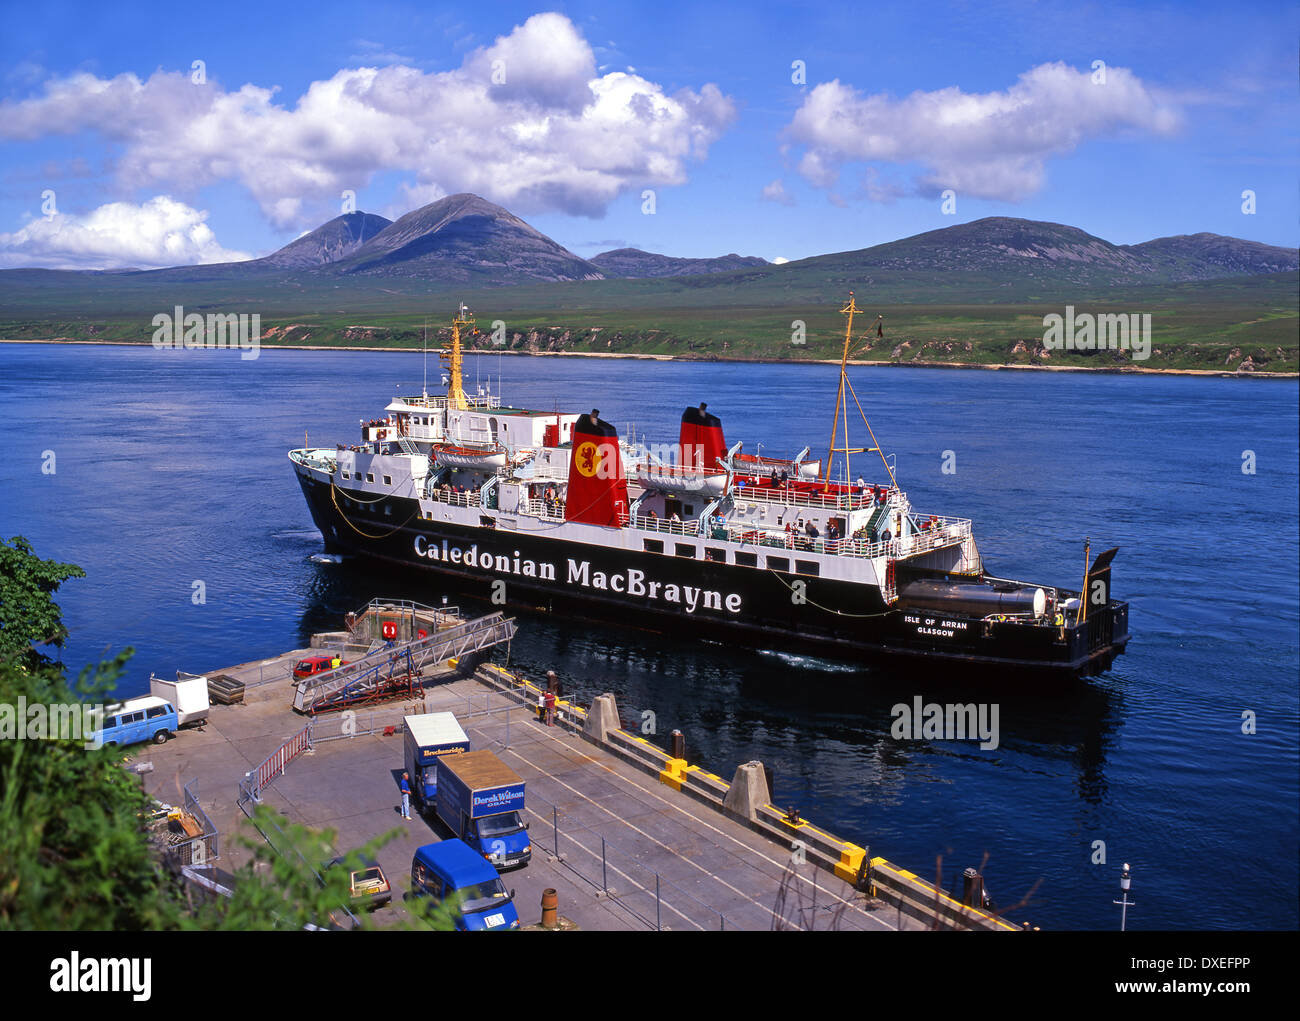 M.V.Isle of Arran berthing at Port Askaig, islay with the paps of jura in view. Stock Photo